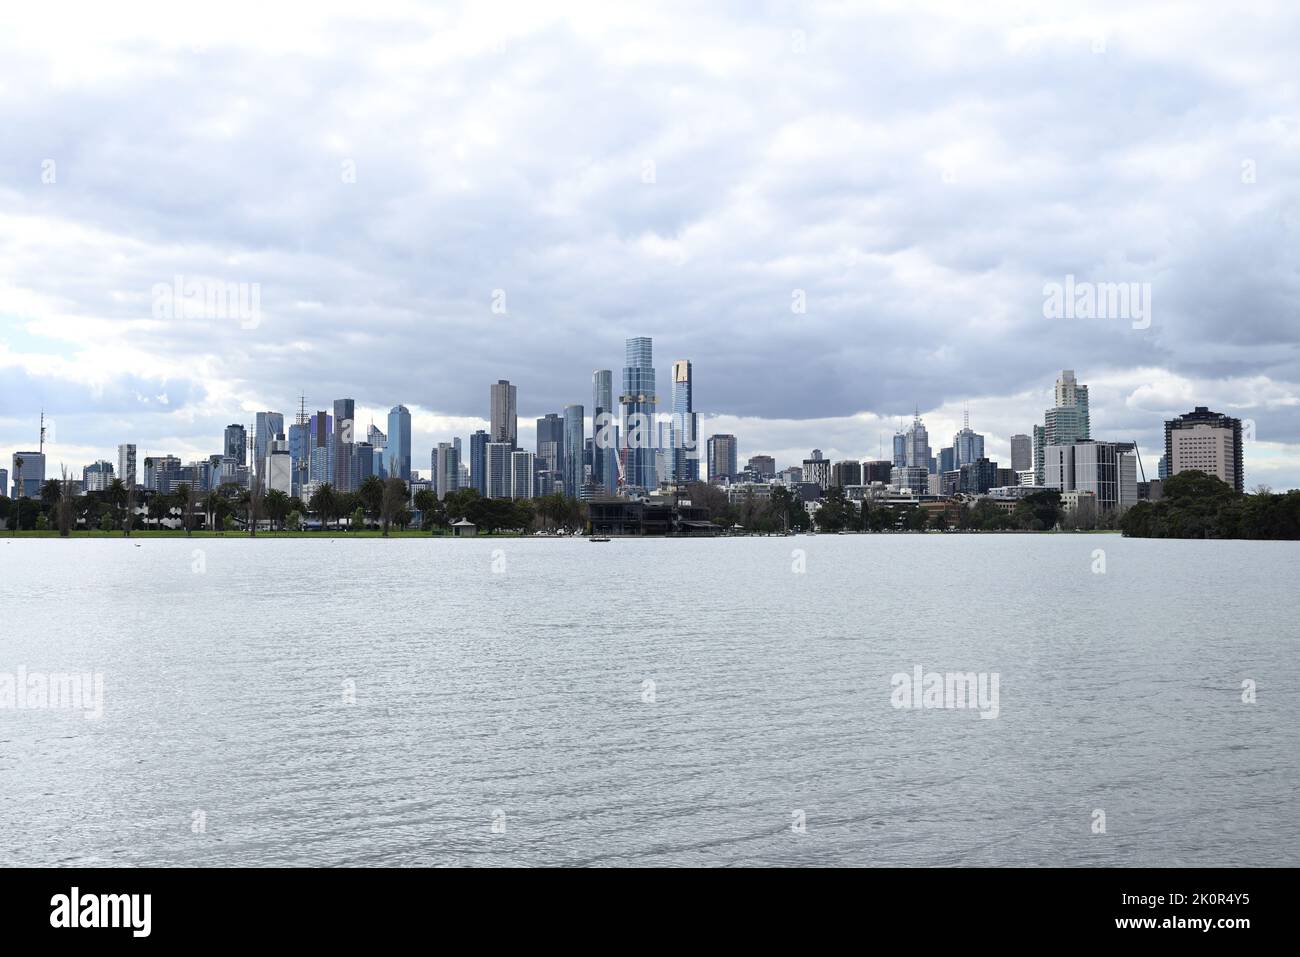 The south side of Melbourne's CBD, seen across Albert Park Lake during a cloudy day Stock Photo